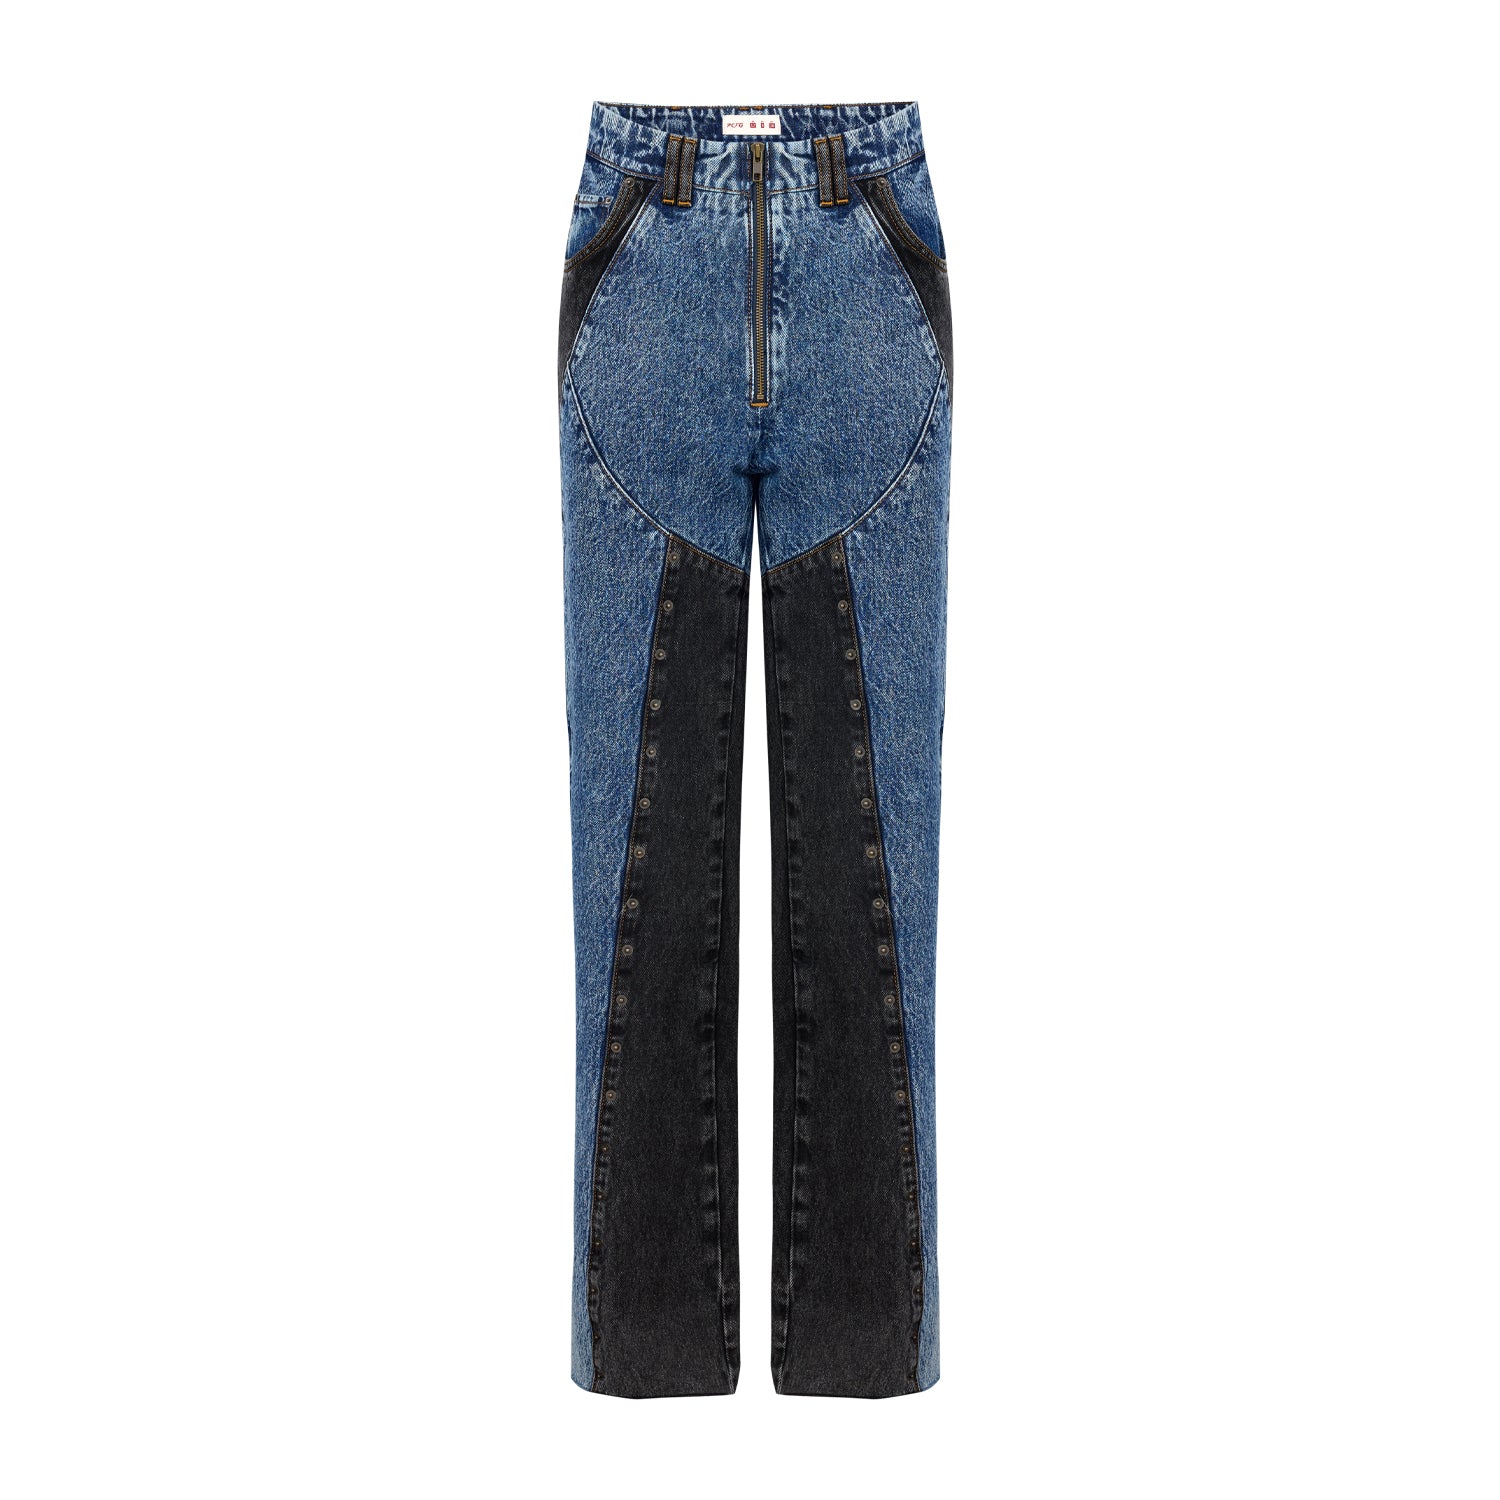 FREE HEAVEN TWO COLOR JEANS